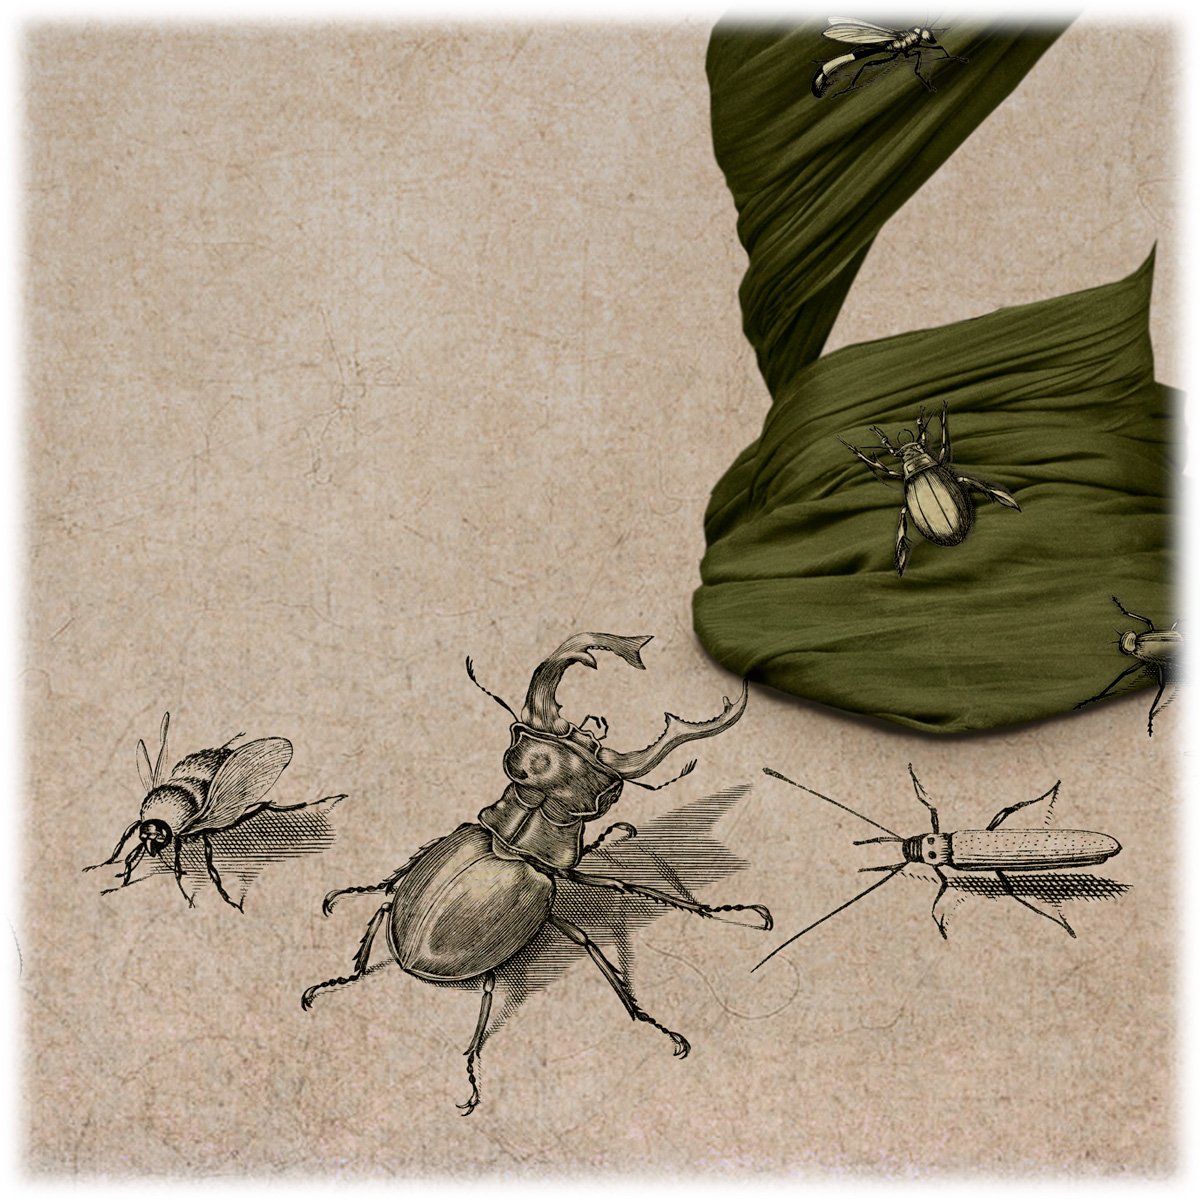 close up of figurative photo art piece showing insects on the floor